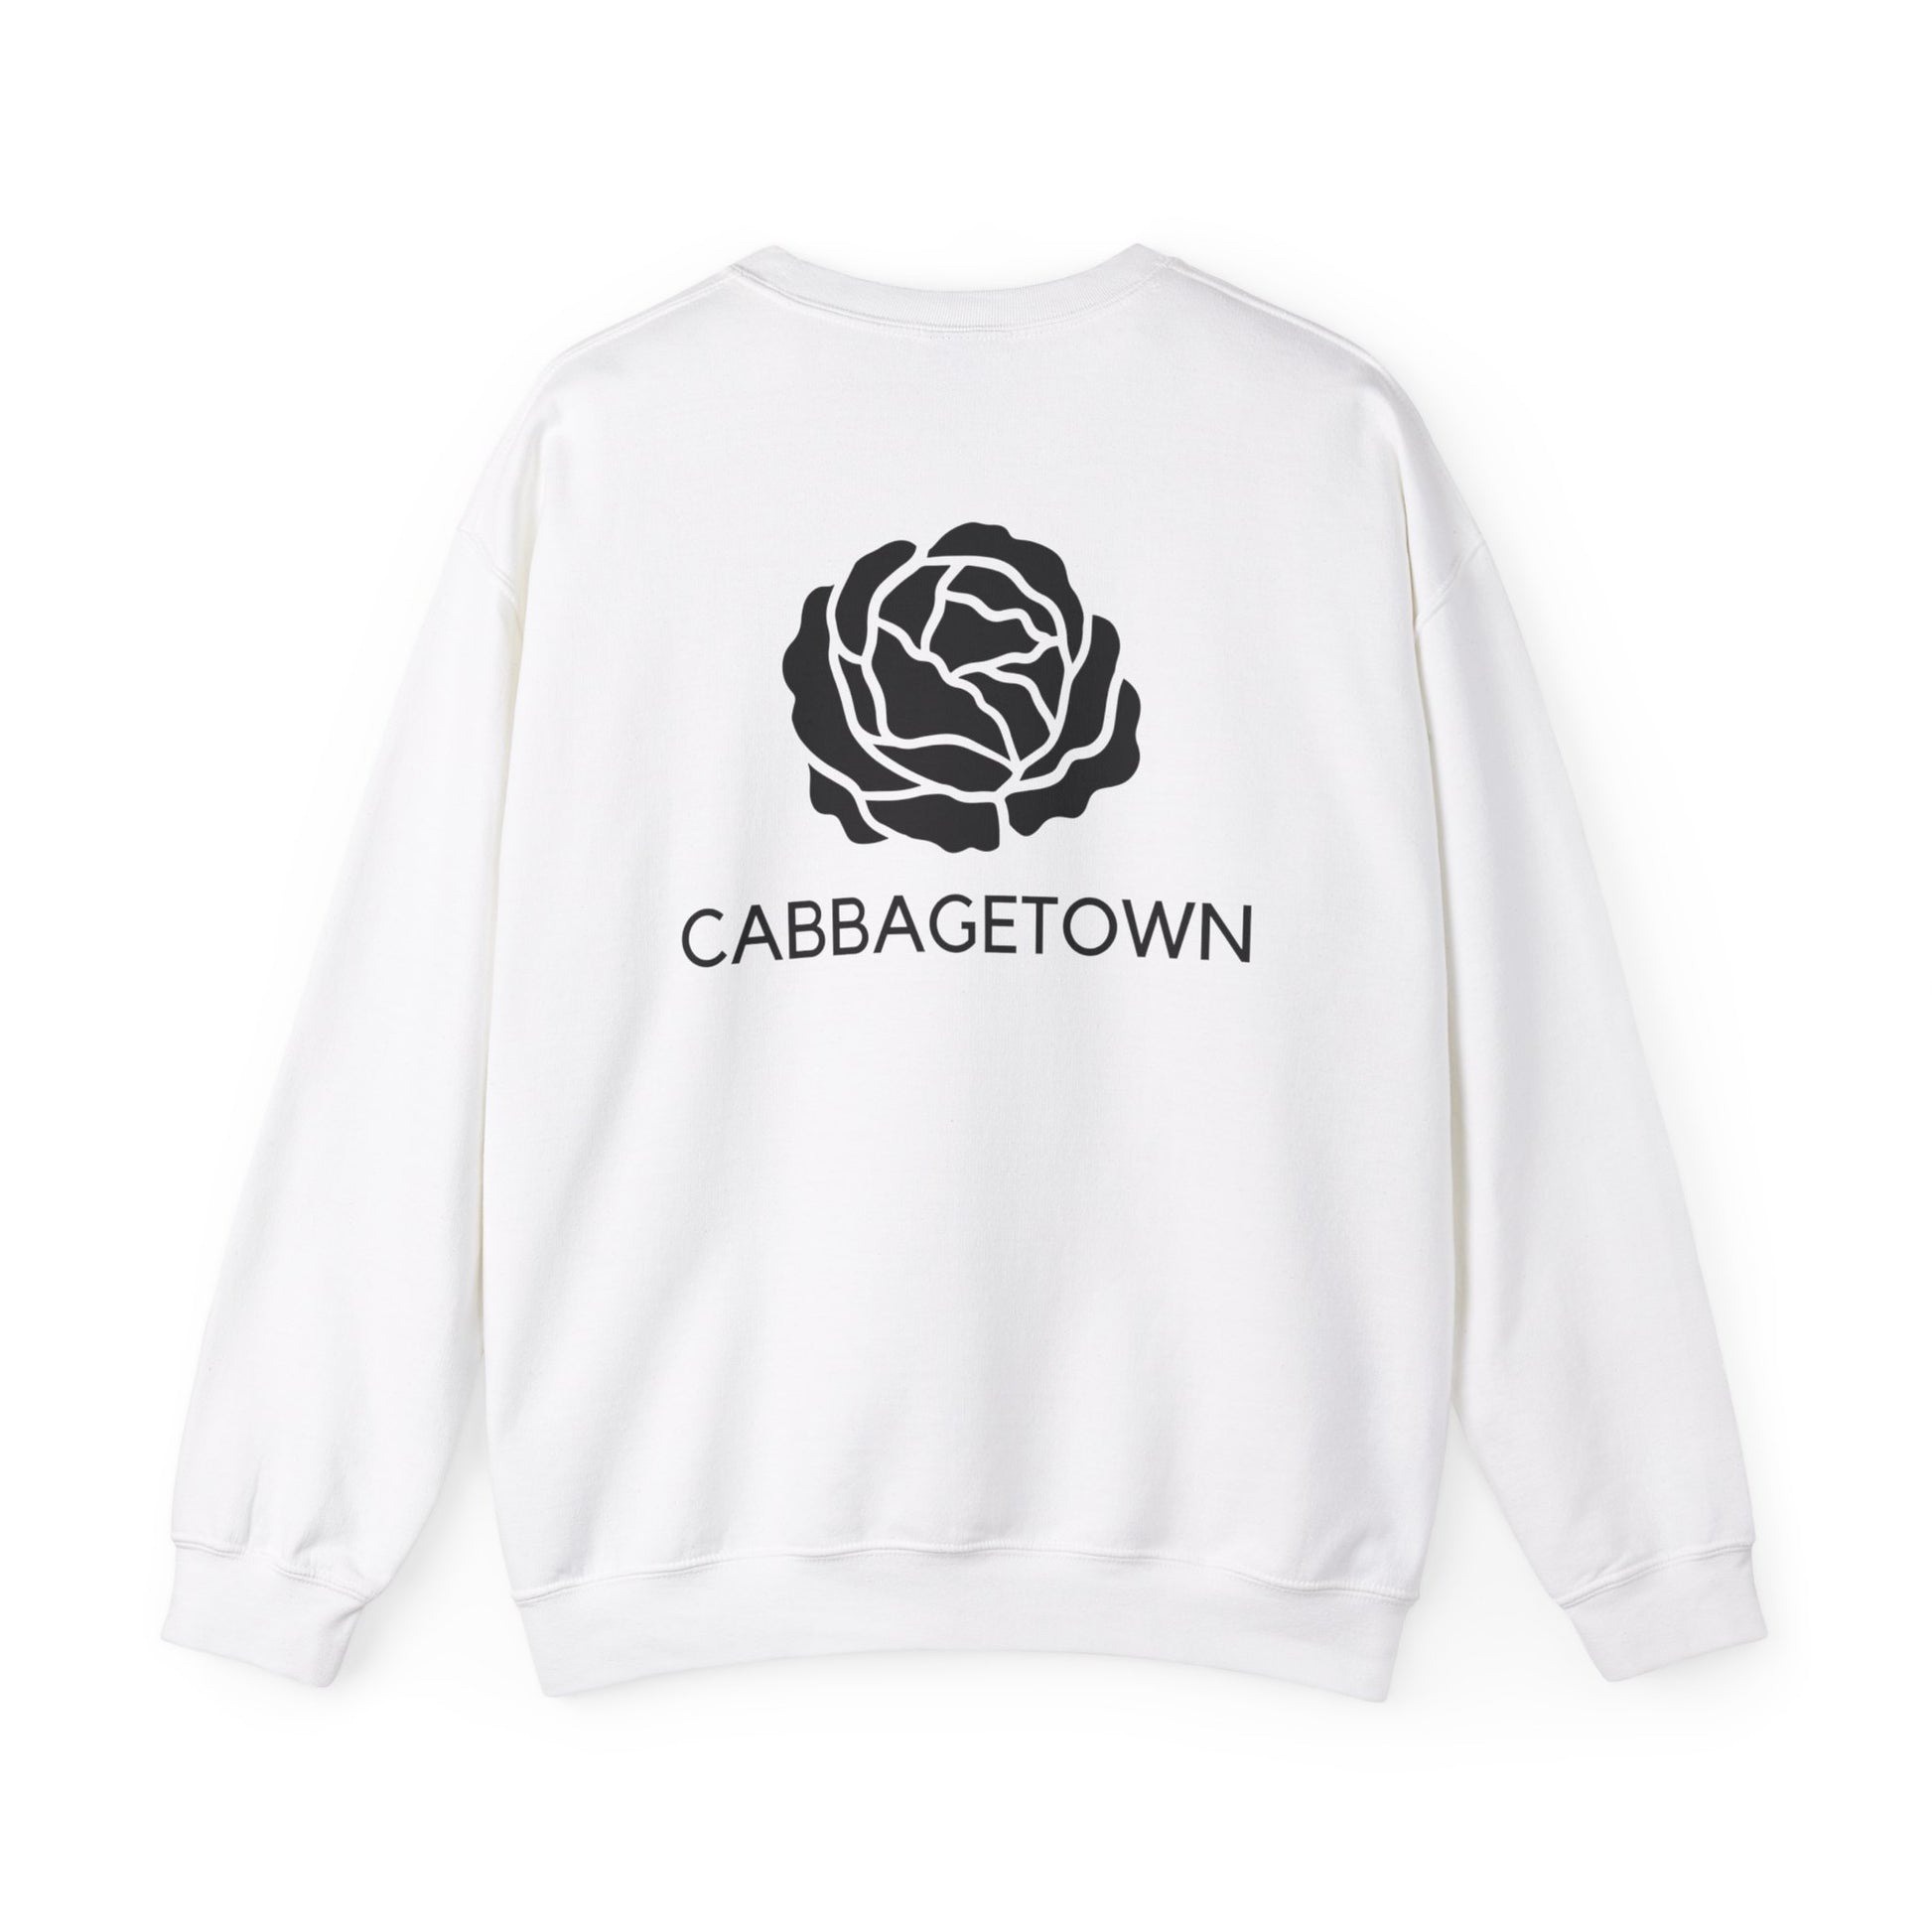 A white Unisex Heavy Blend™ Crewneck Monochrome Logo and Cabbagetown Sweatshirt with the word "TORONTO" printed below it, viewed from the back.